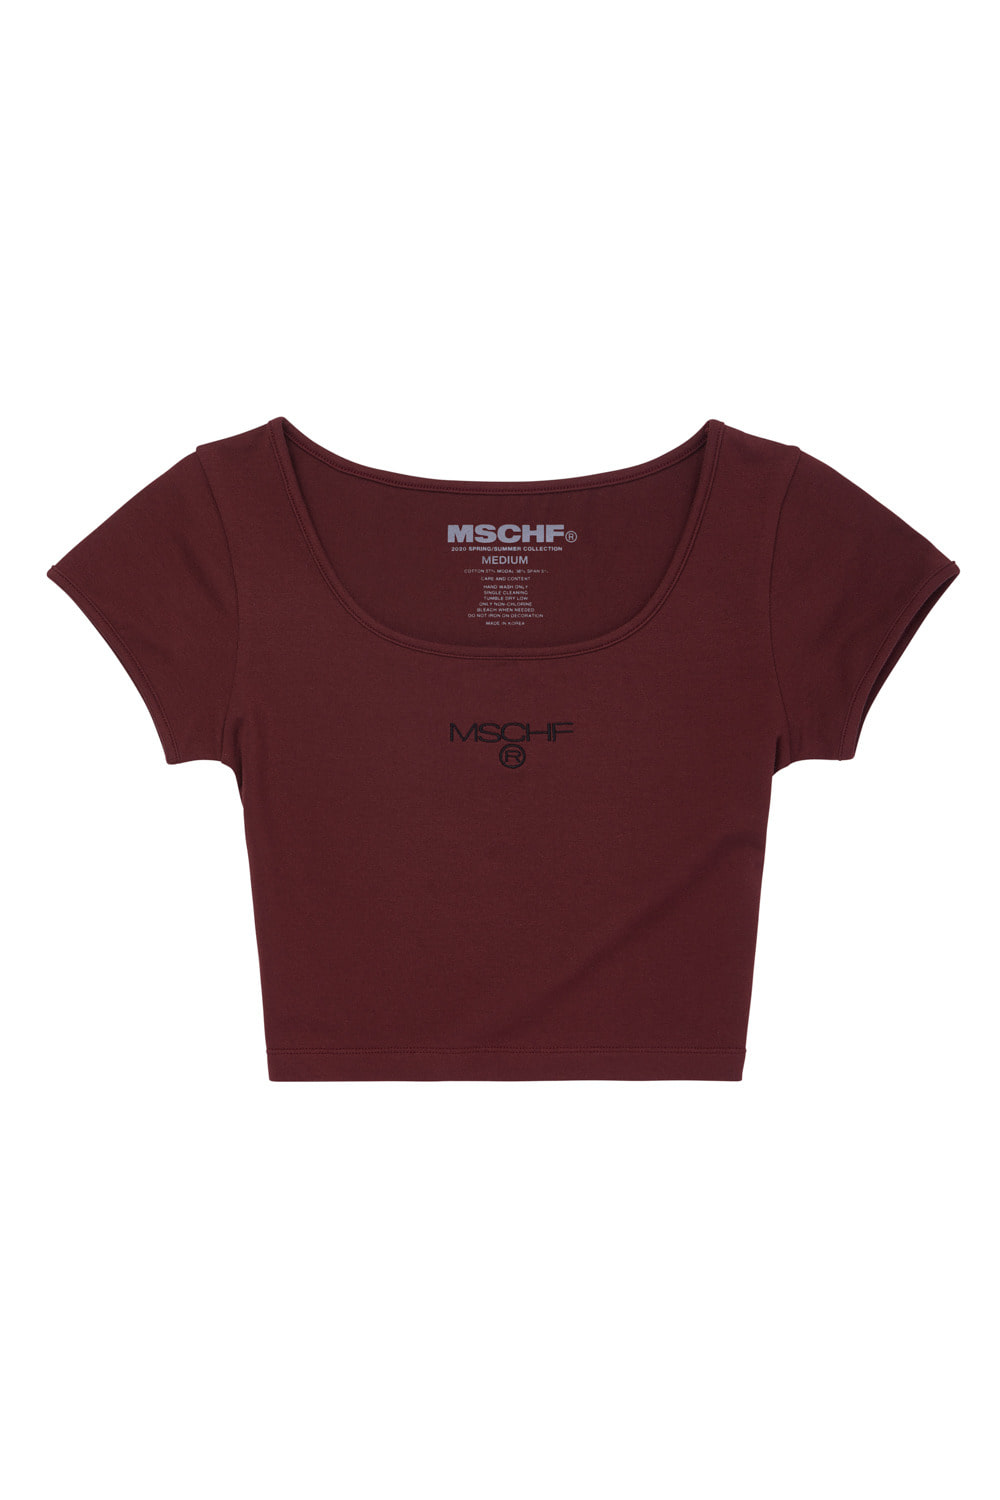 FITTED BASIC_burgundy